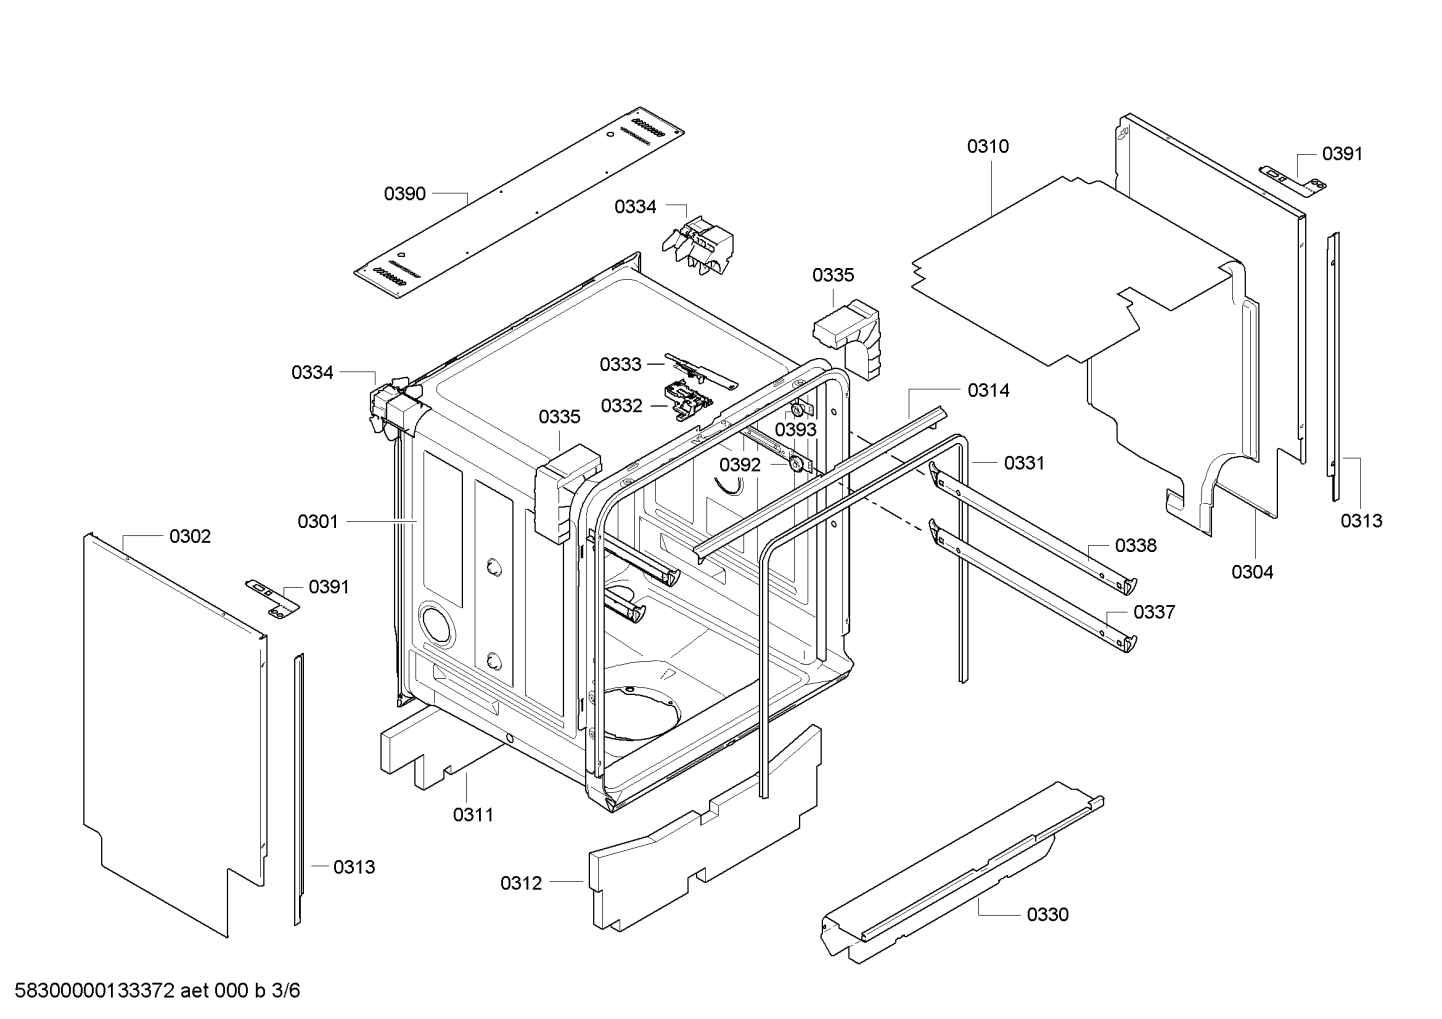 drawing_link_3_device_1637442